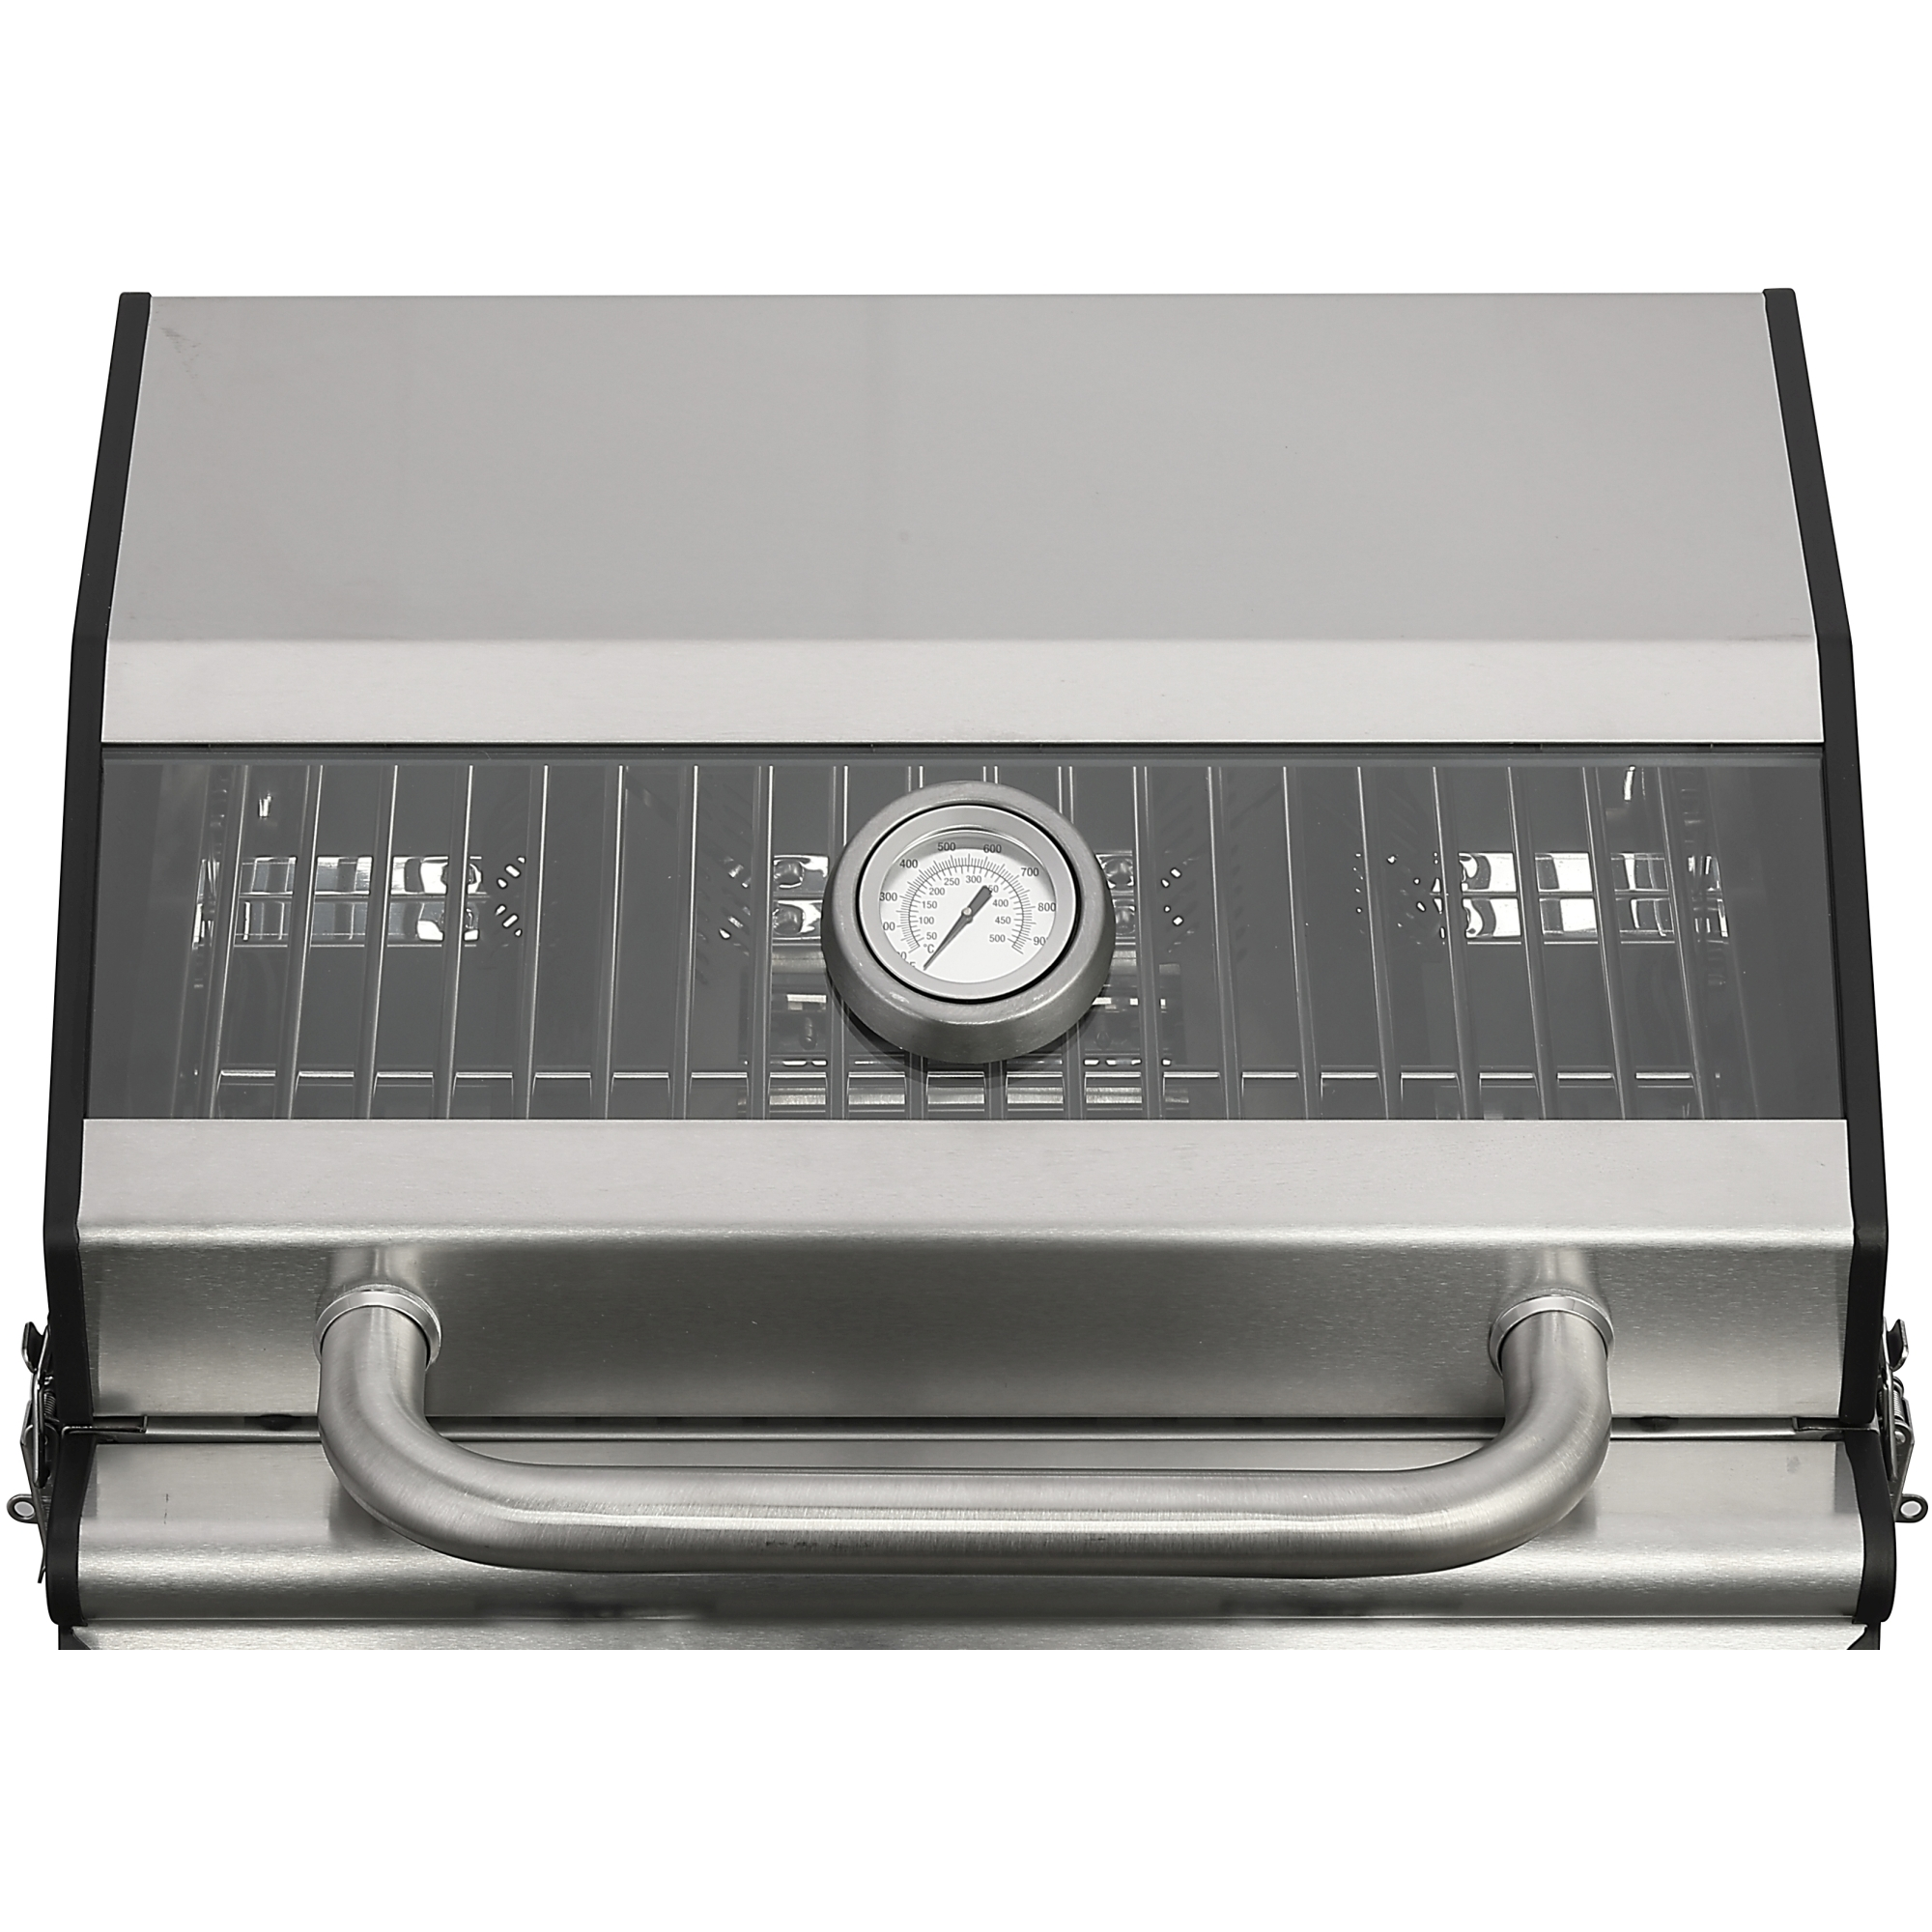 Gasgrill 'Jesolo' 2 Brenner 47,5 x 31,3 x 43,2 cm + product picture